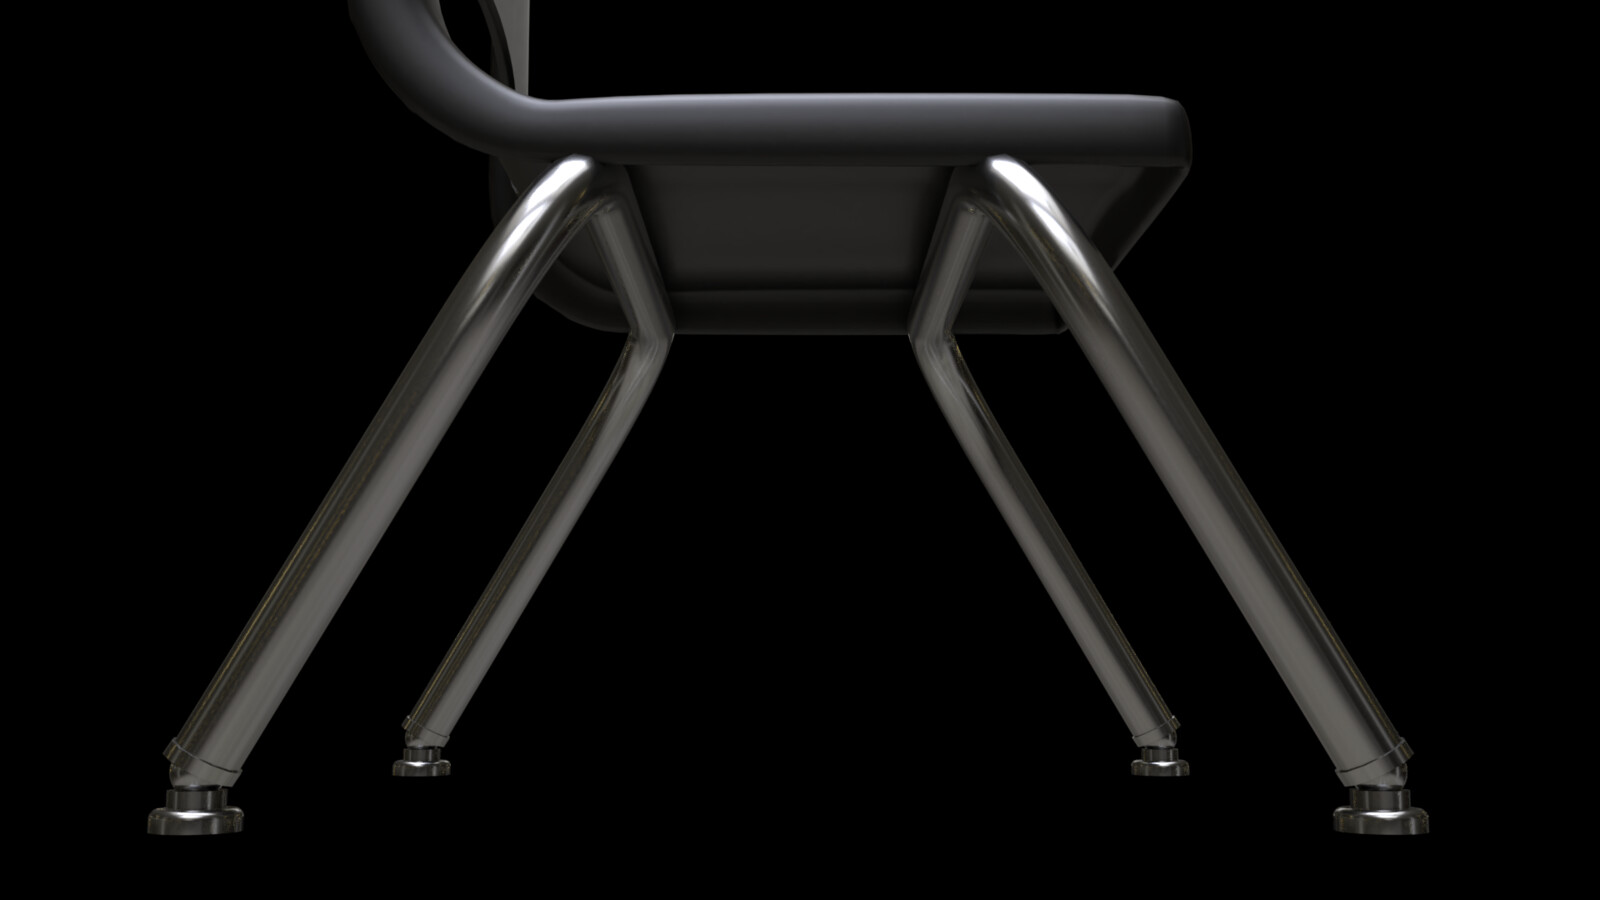 Student chair 3 render 2